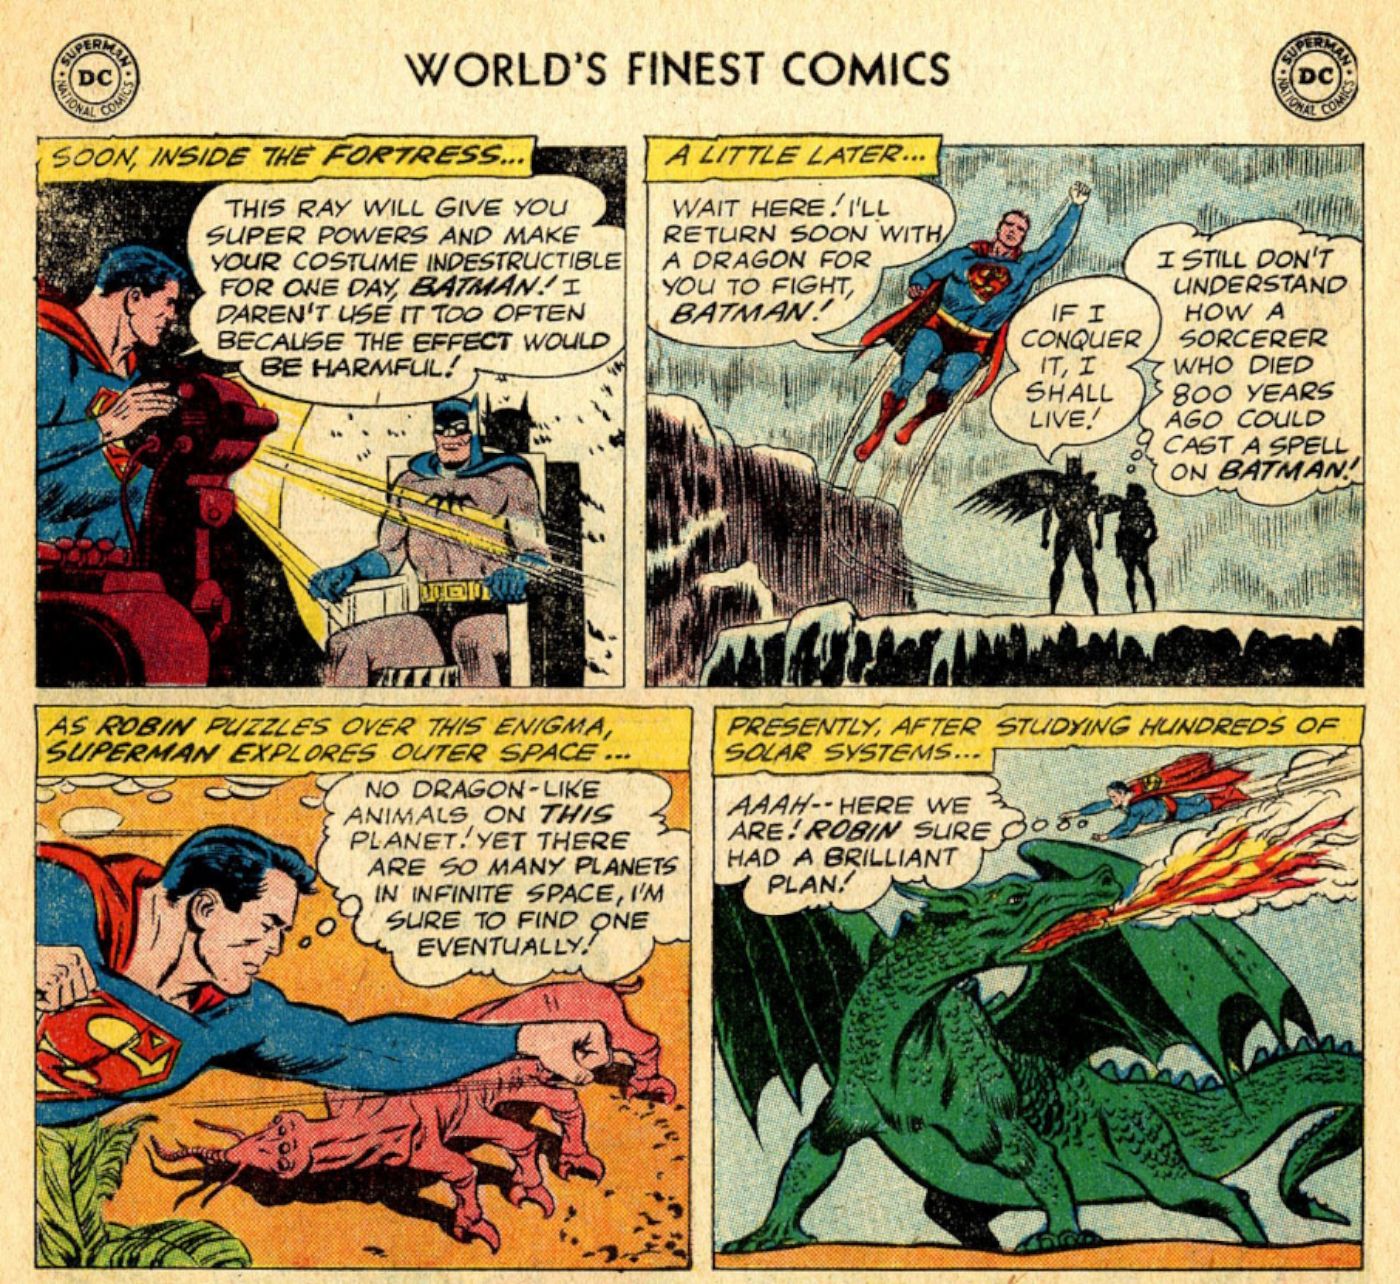 Comic book panels: Superman Gives Batman Super Powers To Fight A Dragon With